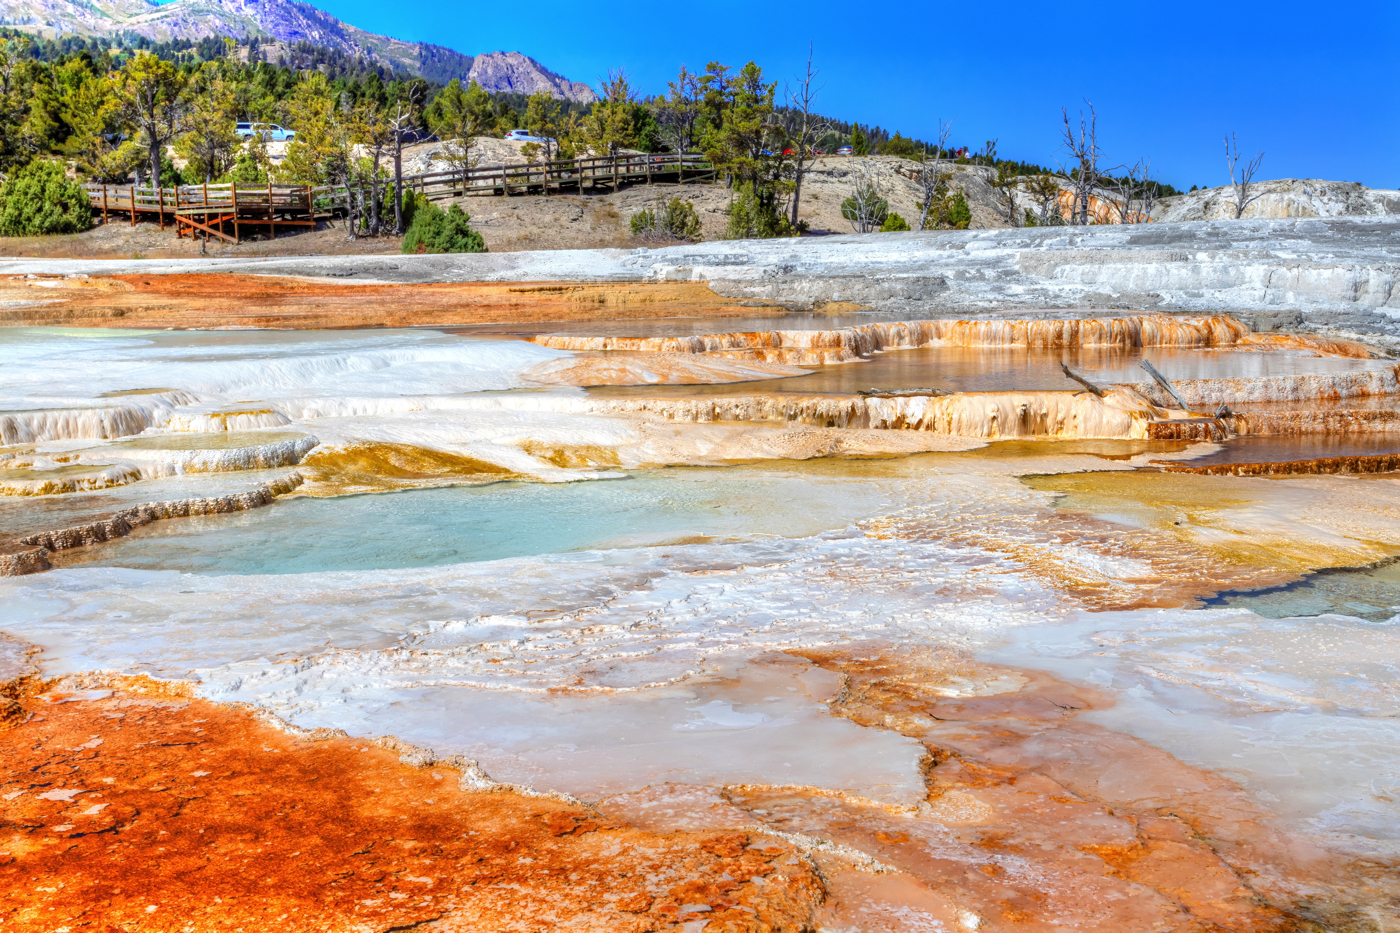 5 SPECTACULAR THINGS YOU MUST DO IN MAMMOTH HOT SPRINGS